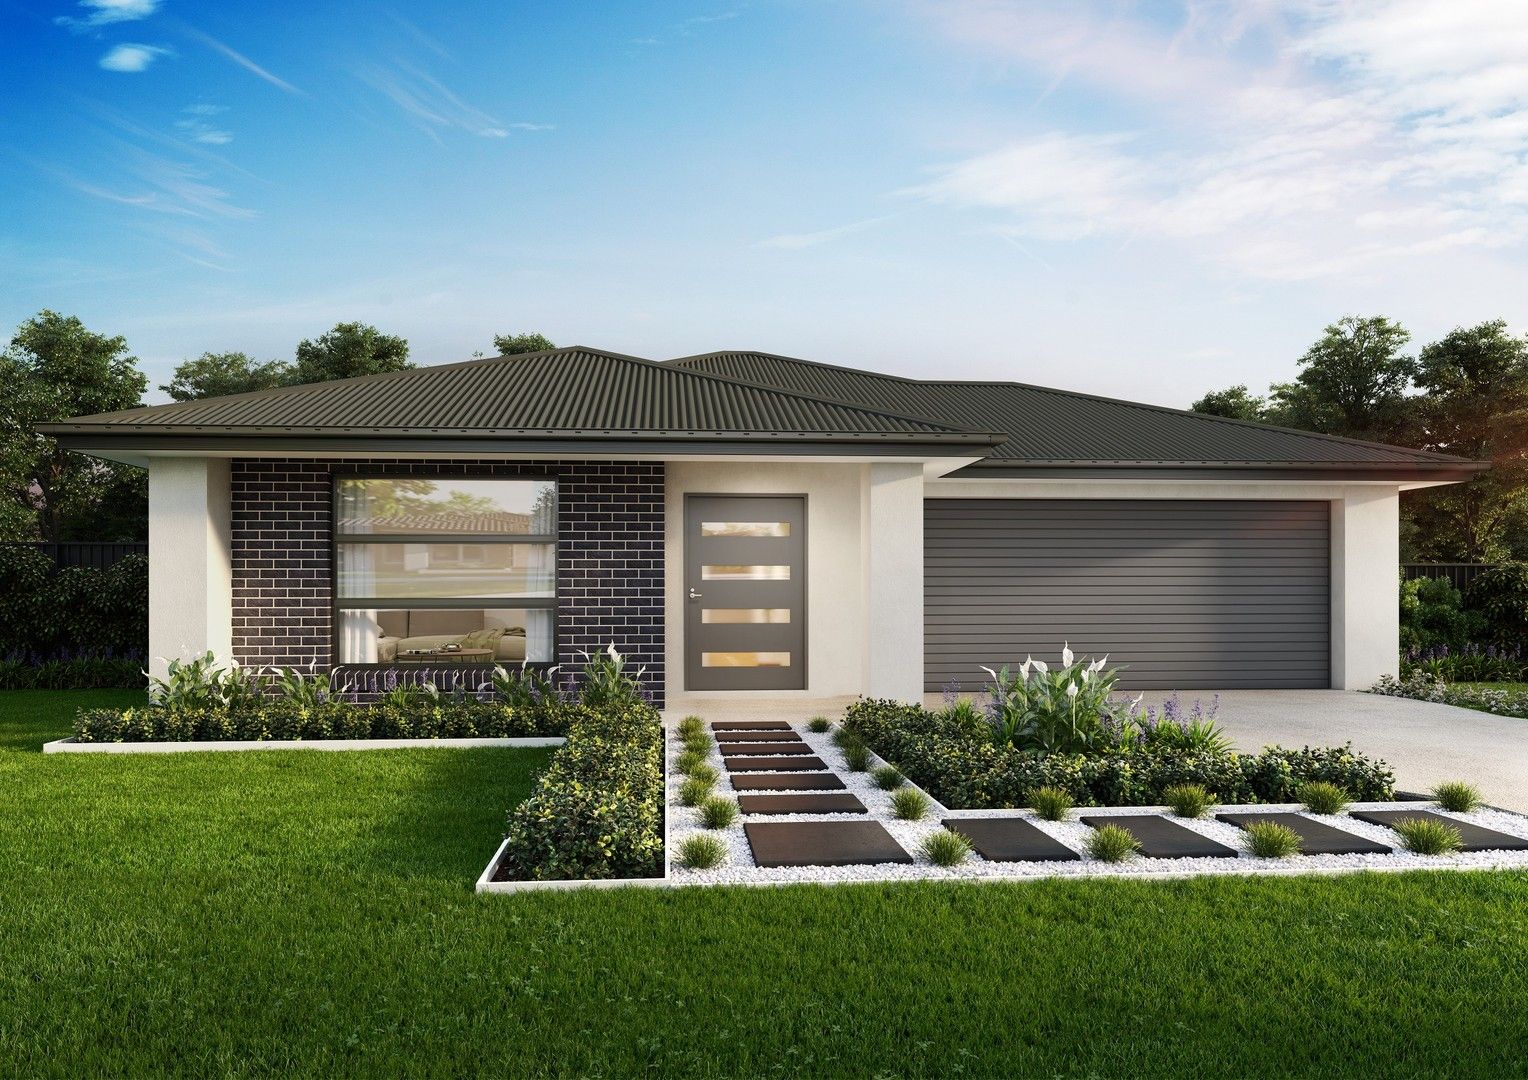 3 bedrooms New House & Land in  RUTHERFORD NSW, 2320